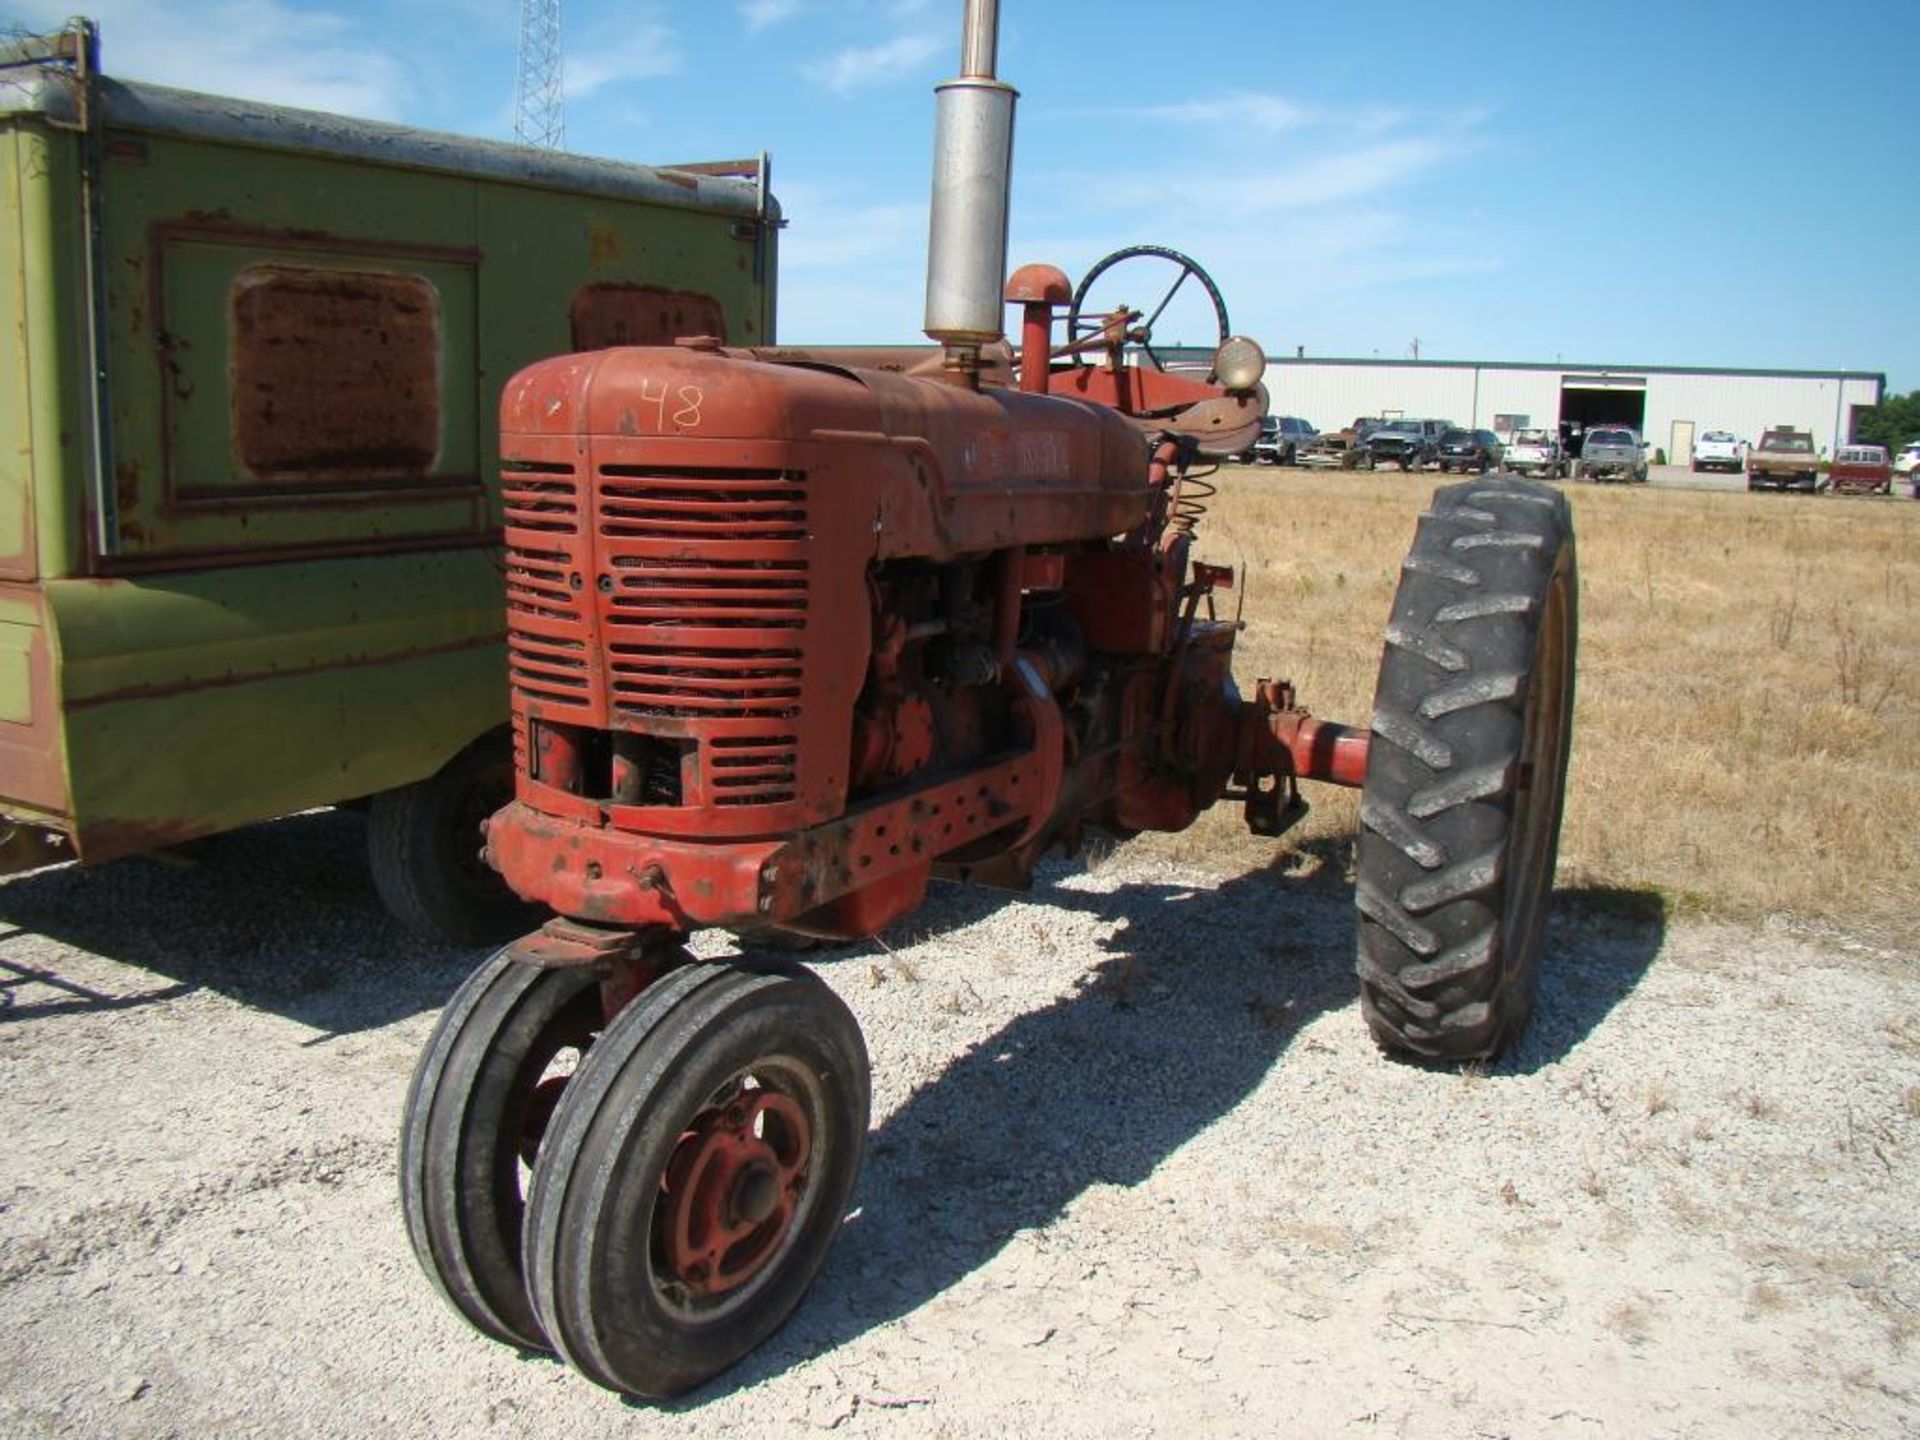 IH model M tractor, NF, gas